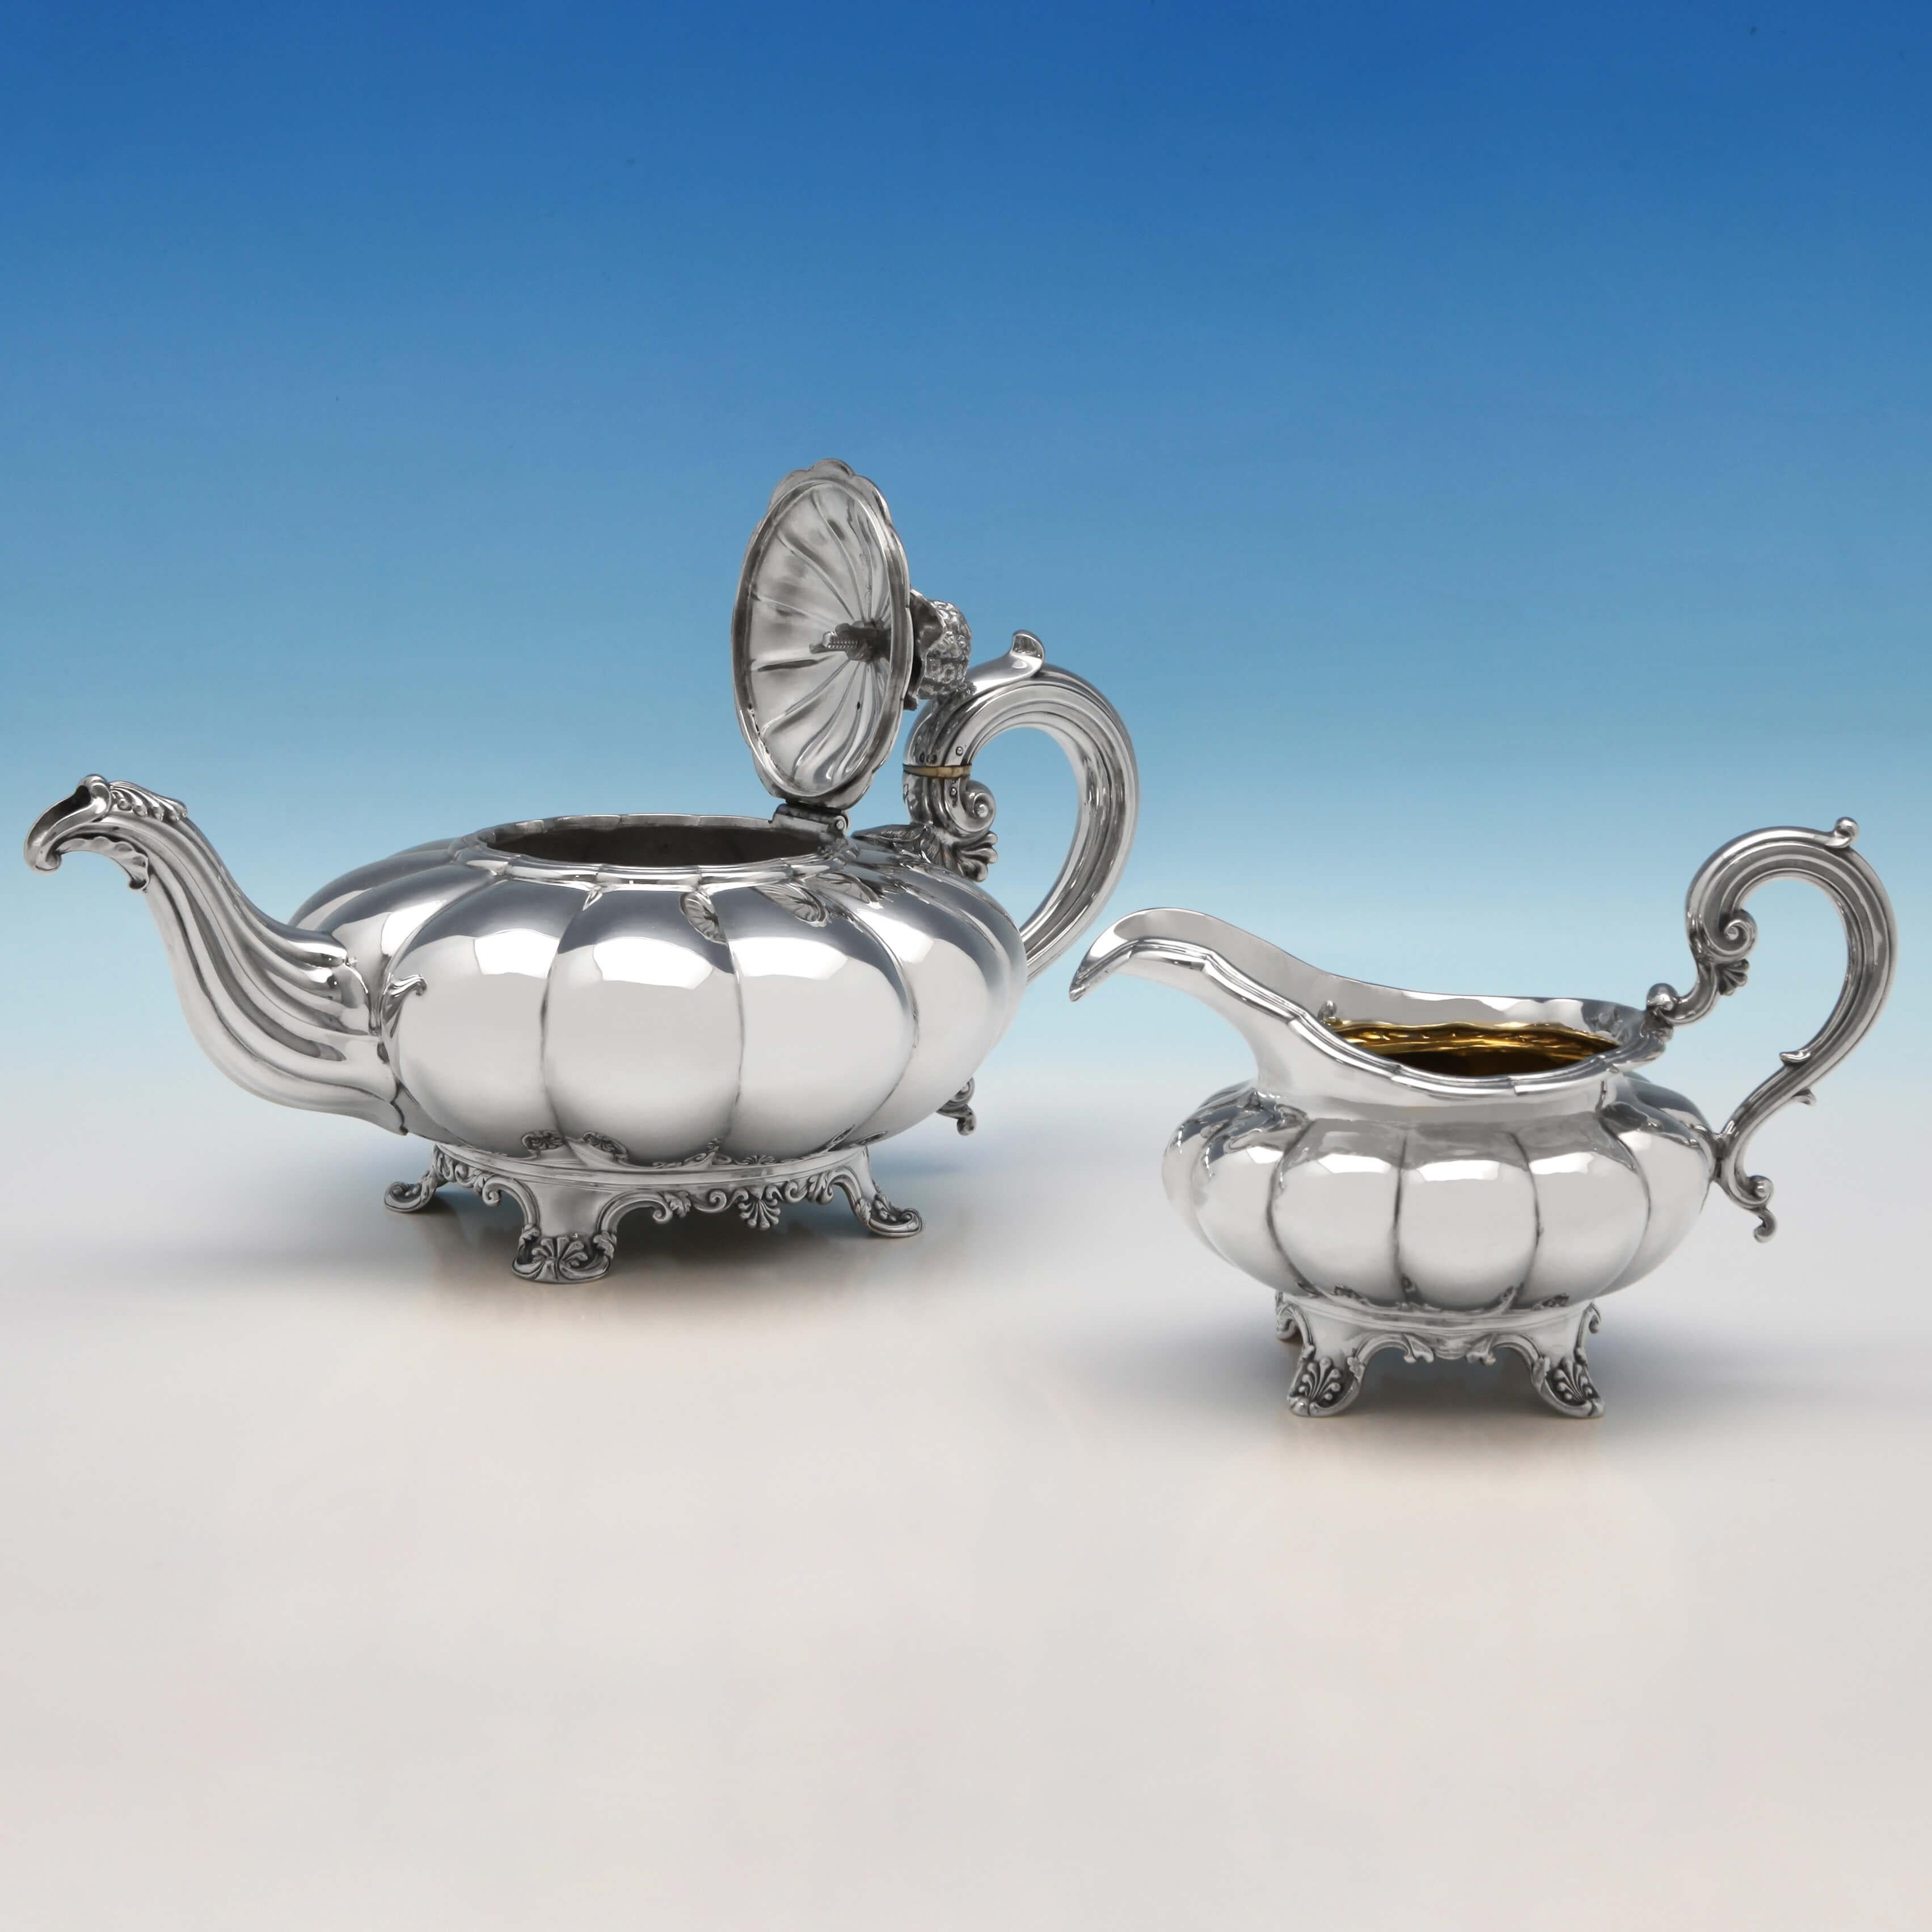 English Melon Design Antique Sterling Silver Five-Piece Tea and Coffee Set by Barnards